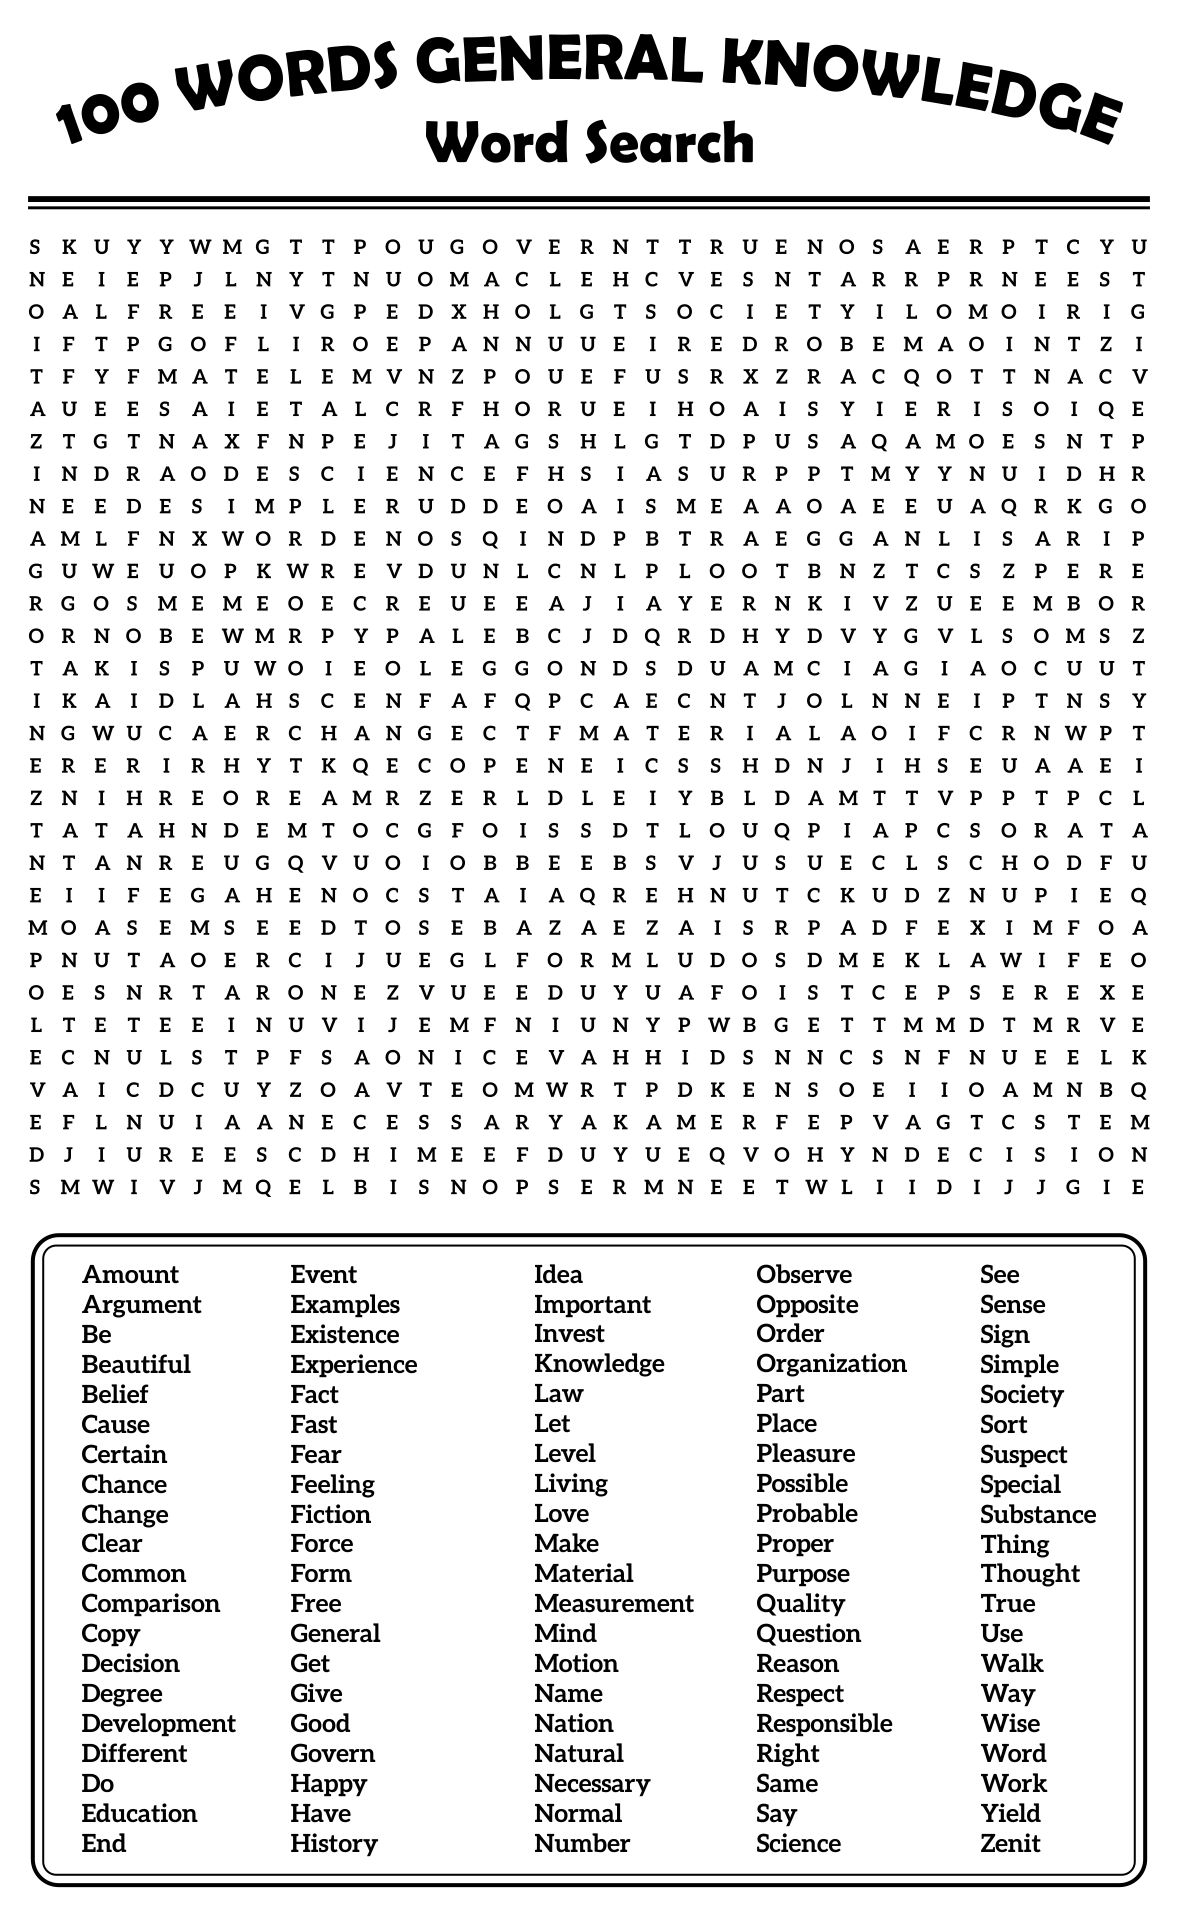 build-a-word-search-puzzle-free-printable-vilcentre